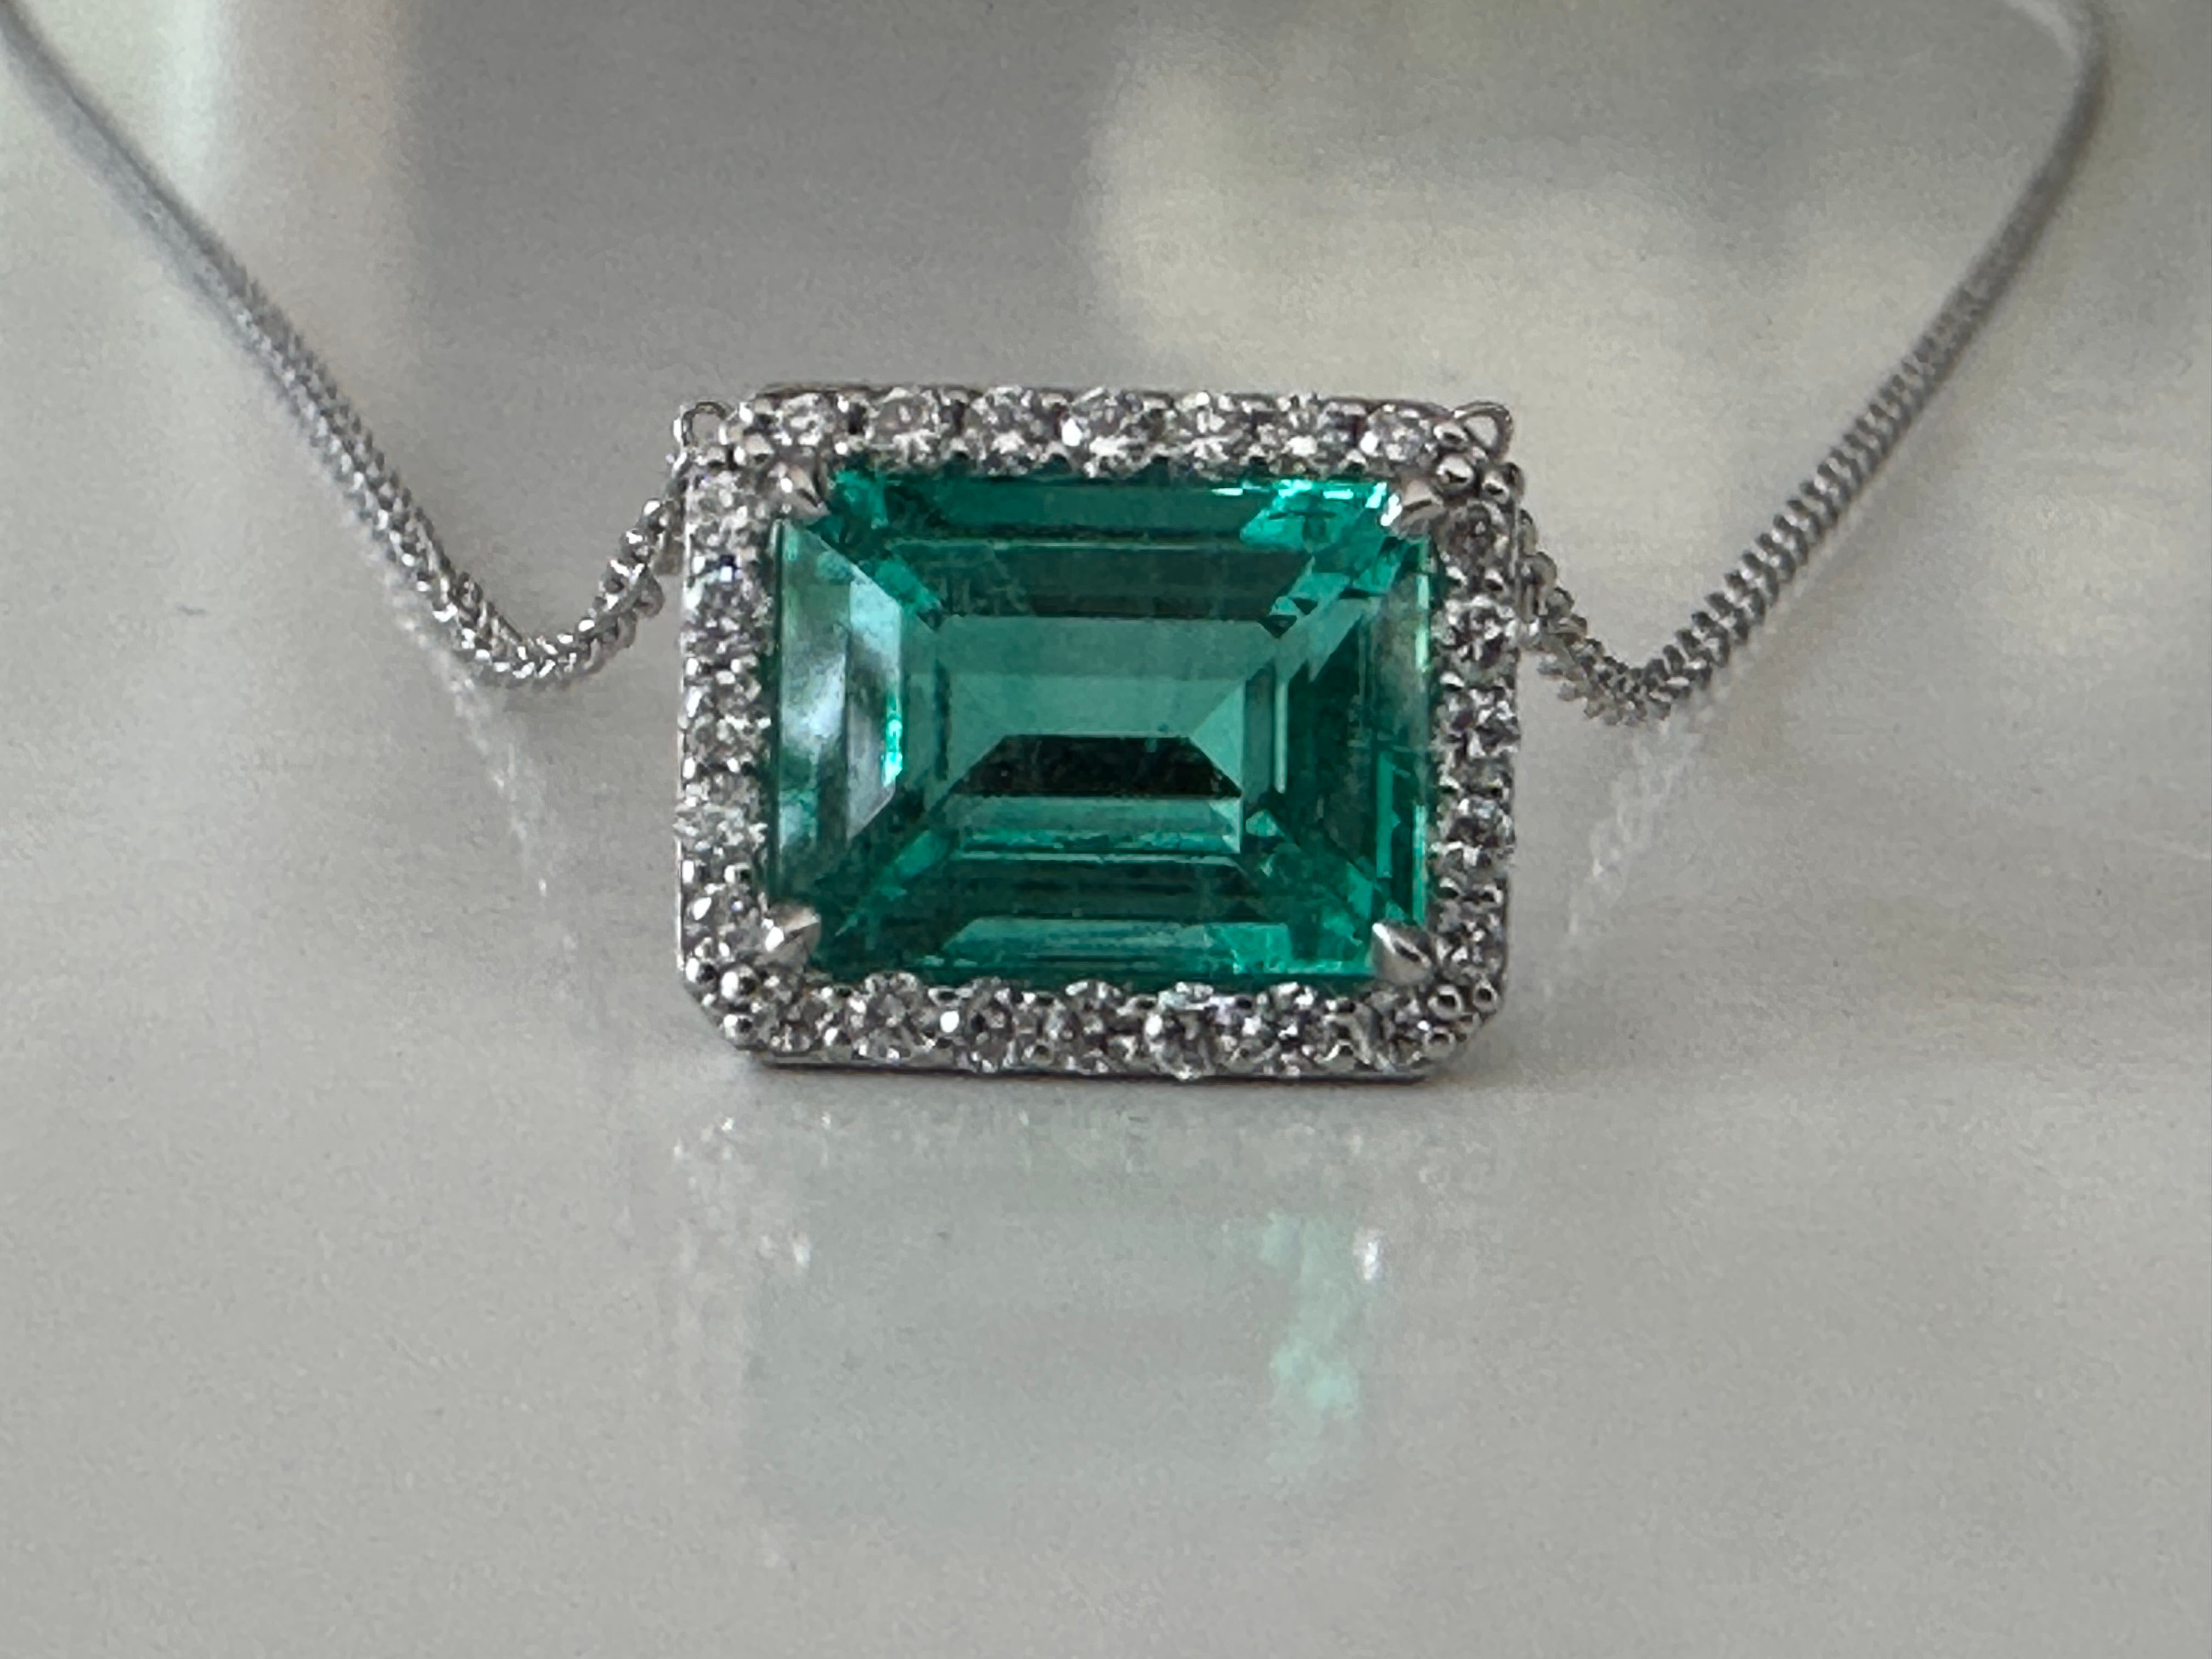 Handcrafted in platinum, this exquisite pendant necklace features a 2.39-carat emerald-shaped Colombian emerald surrounded by a halo of twenty-four round diamonds totaling 0.23 carats, GH color, VS clarity. The emerald is certified by the American